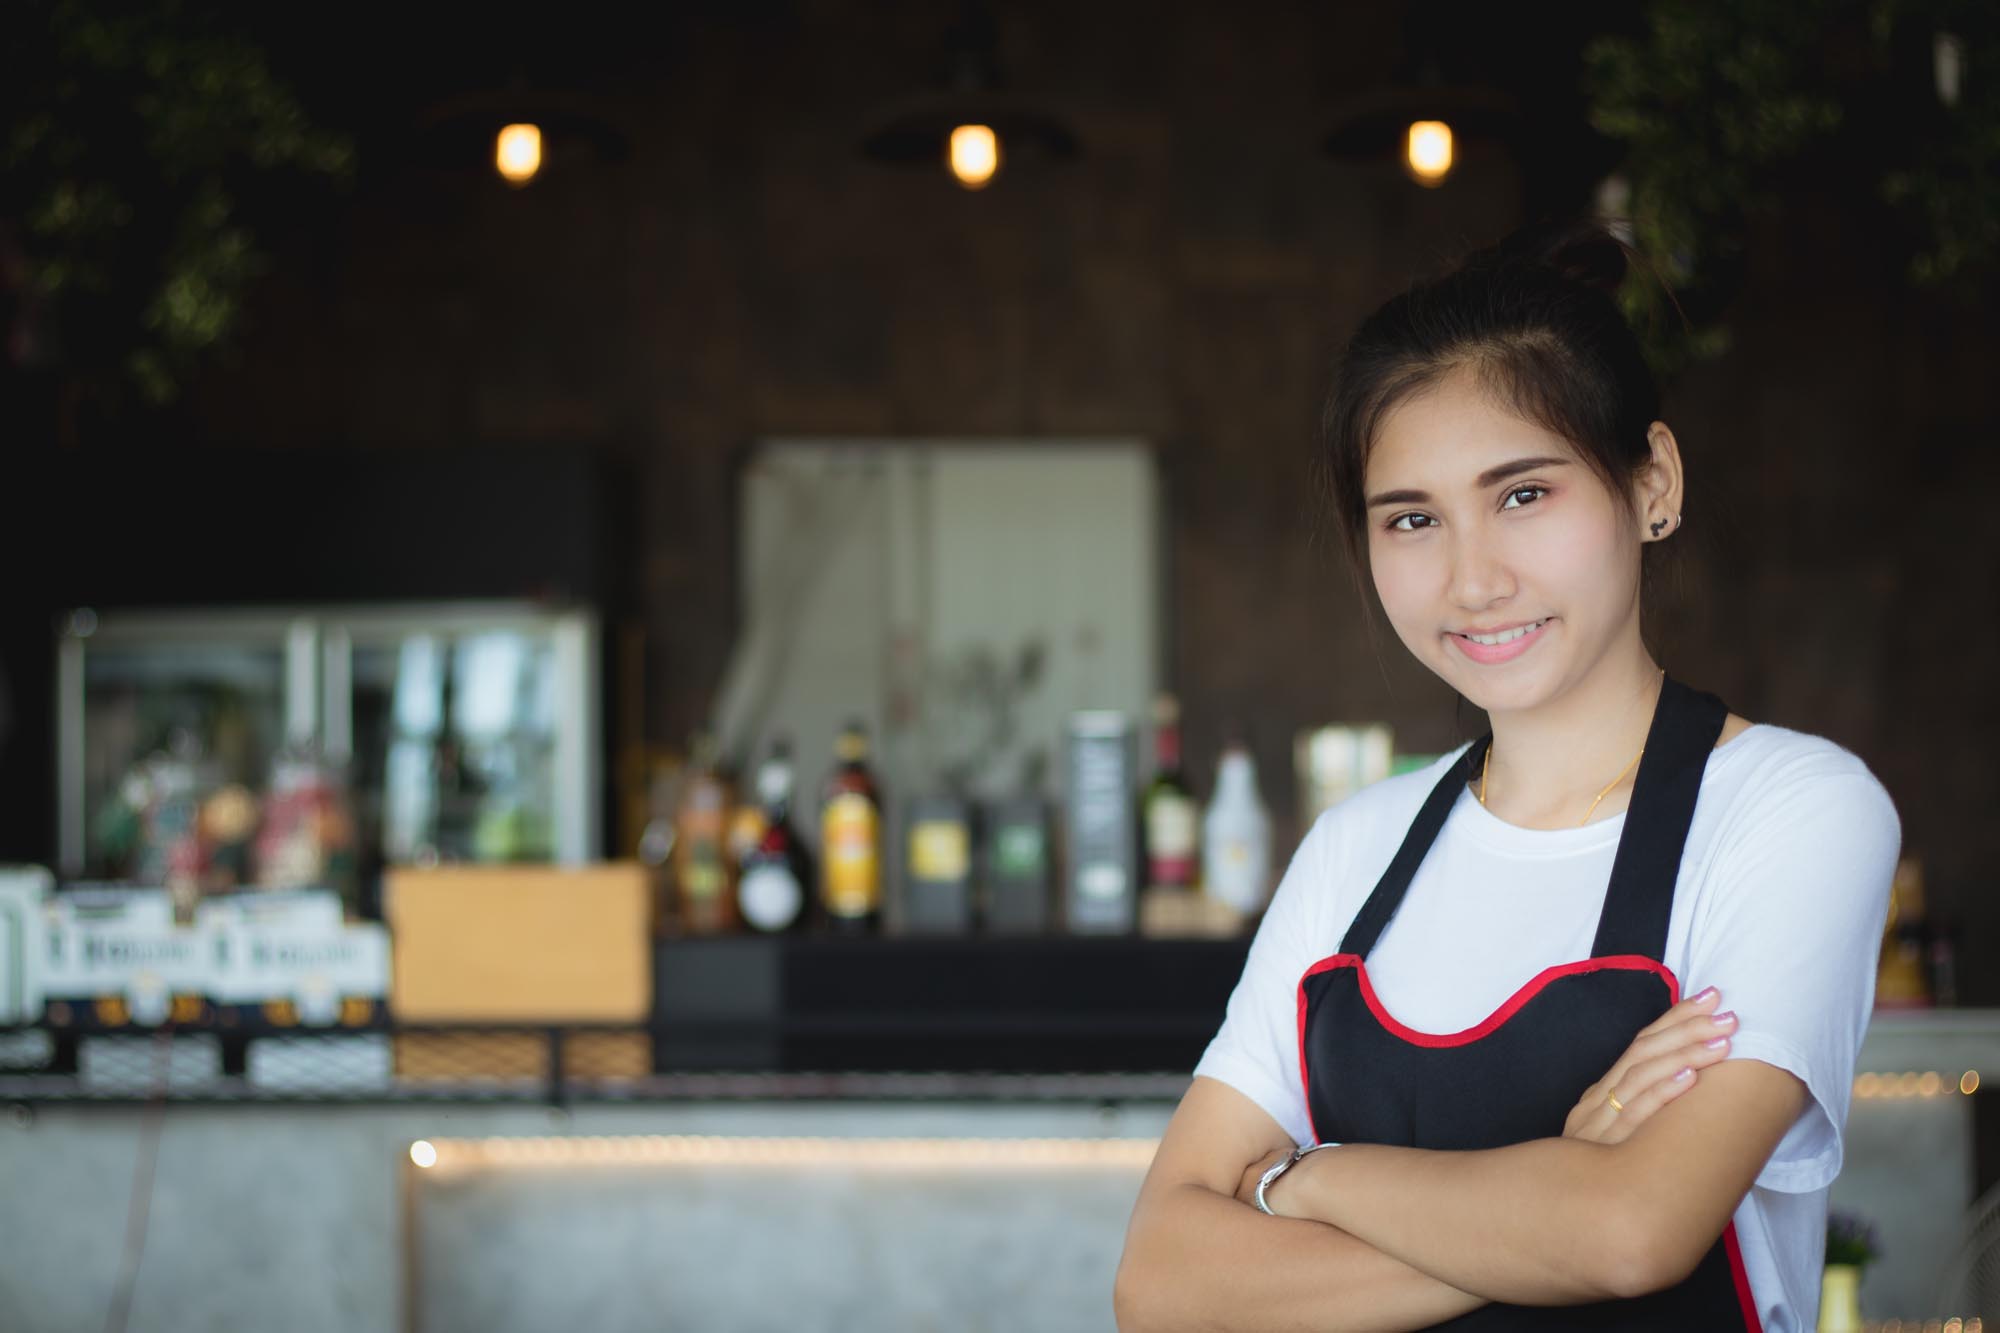 Teen Worker Safety in the Restaurant Industry